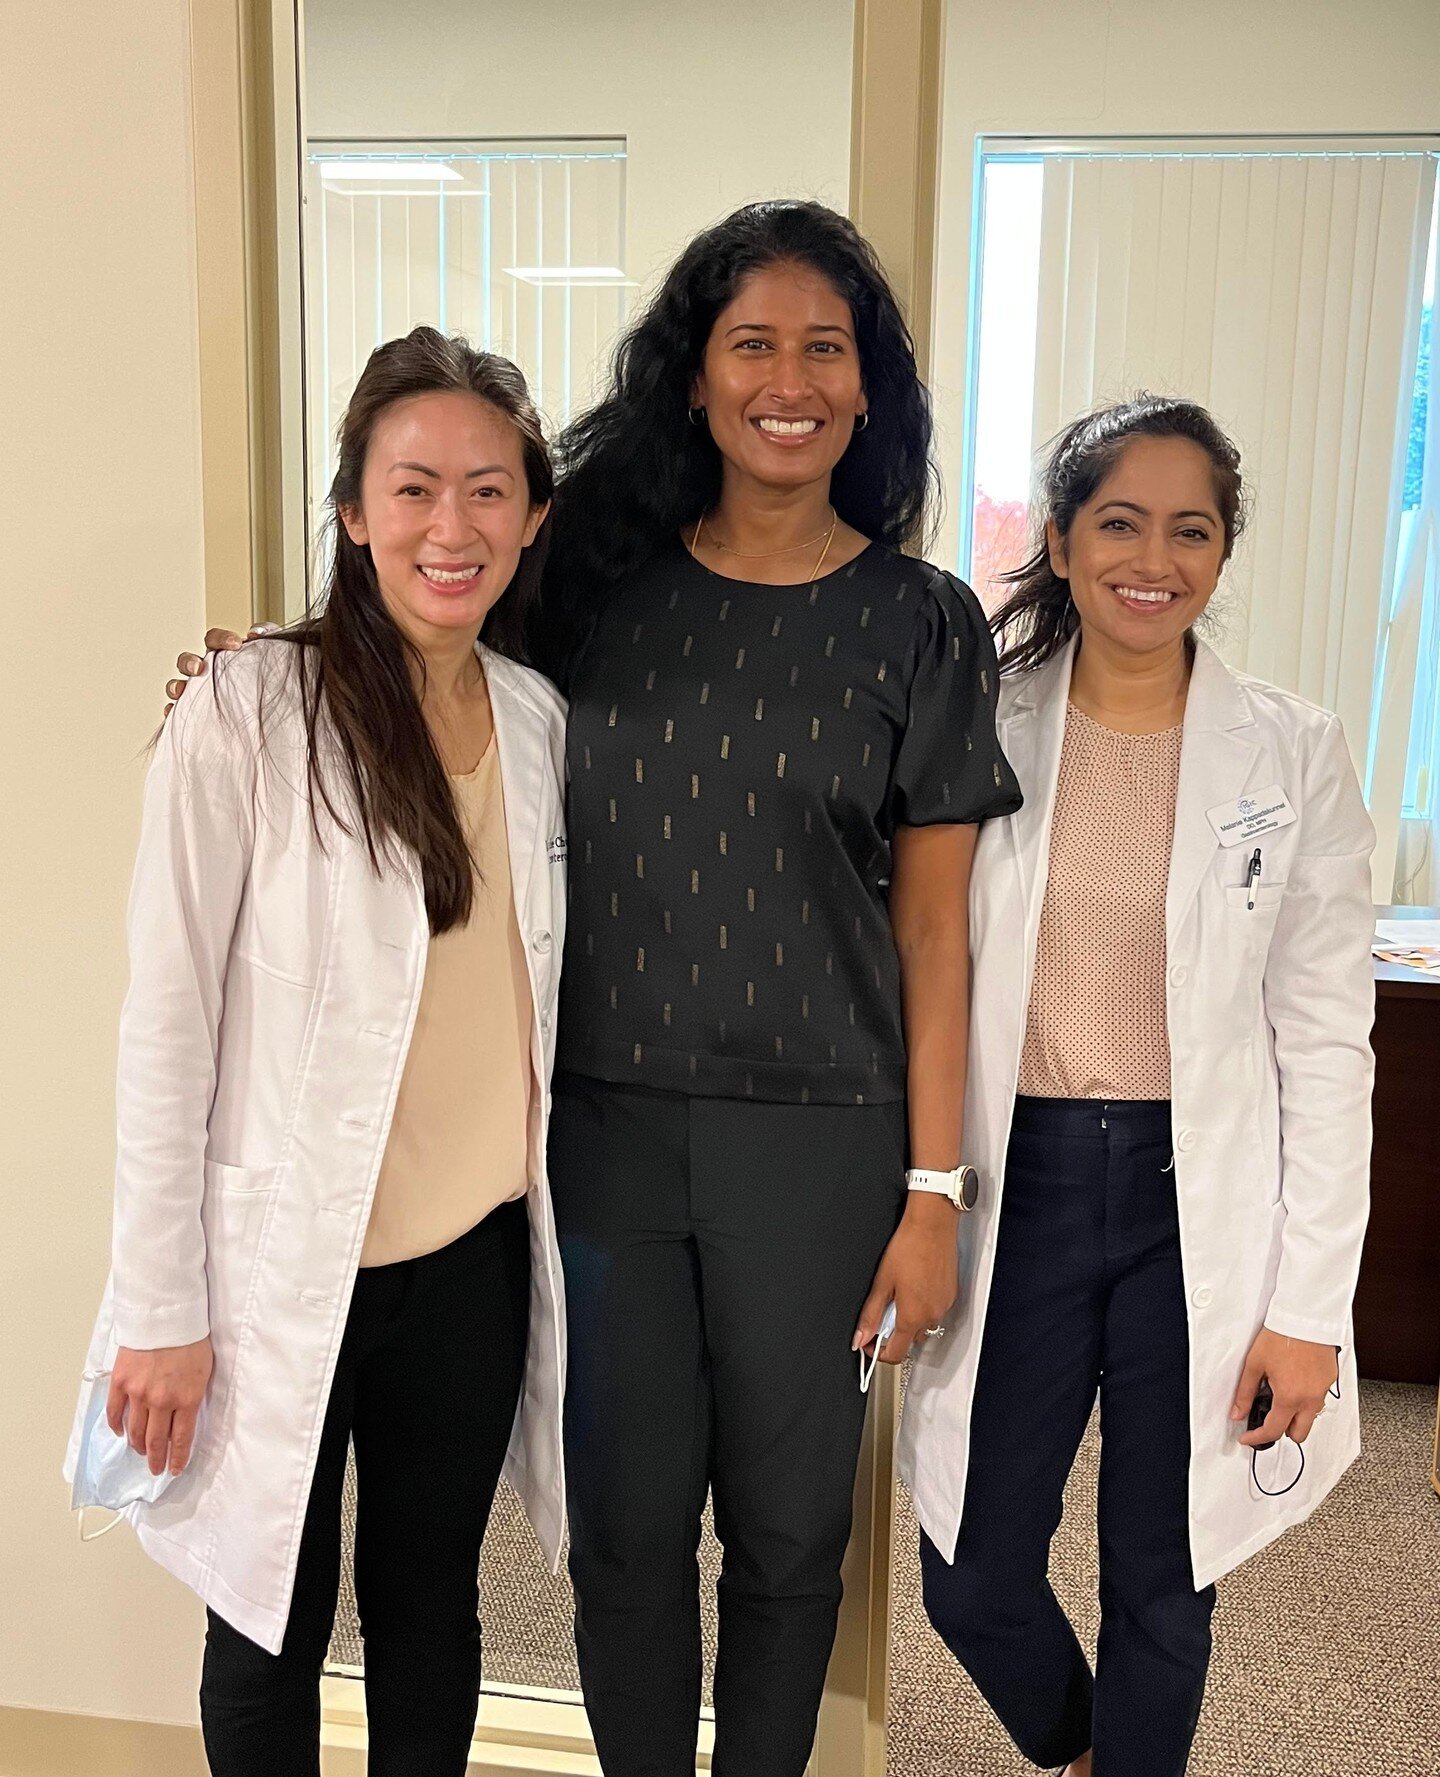 All women docs in the office today! 💪⁠
⁠
Looking for a female gastroenterologist for your next colonoscopy or to see in the office? Our group is one of the only GI practices in the country that's half women physicians 😍